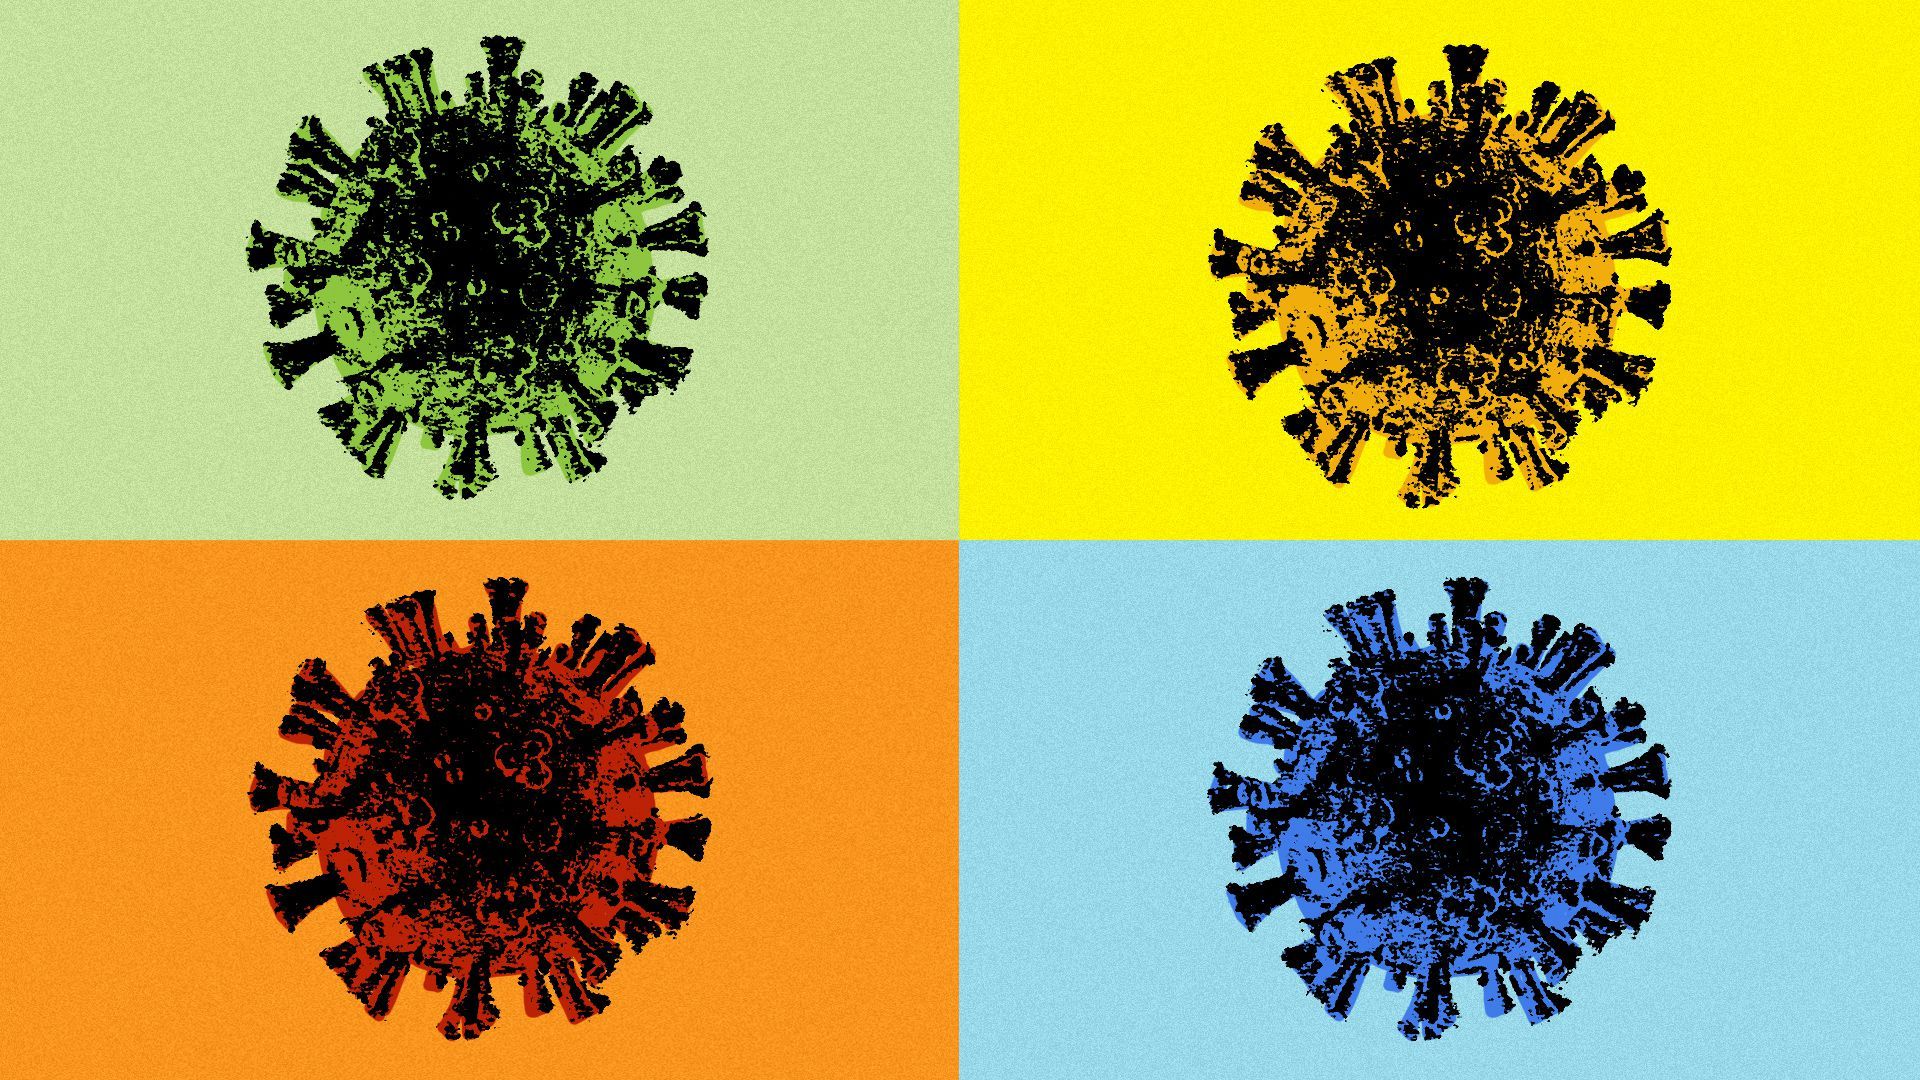 Illustration of four virus cells in an Andy Warhol photocopy style, with coloring related to the four seasons.